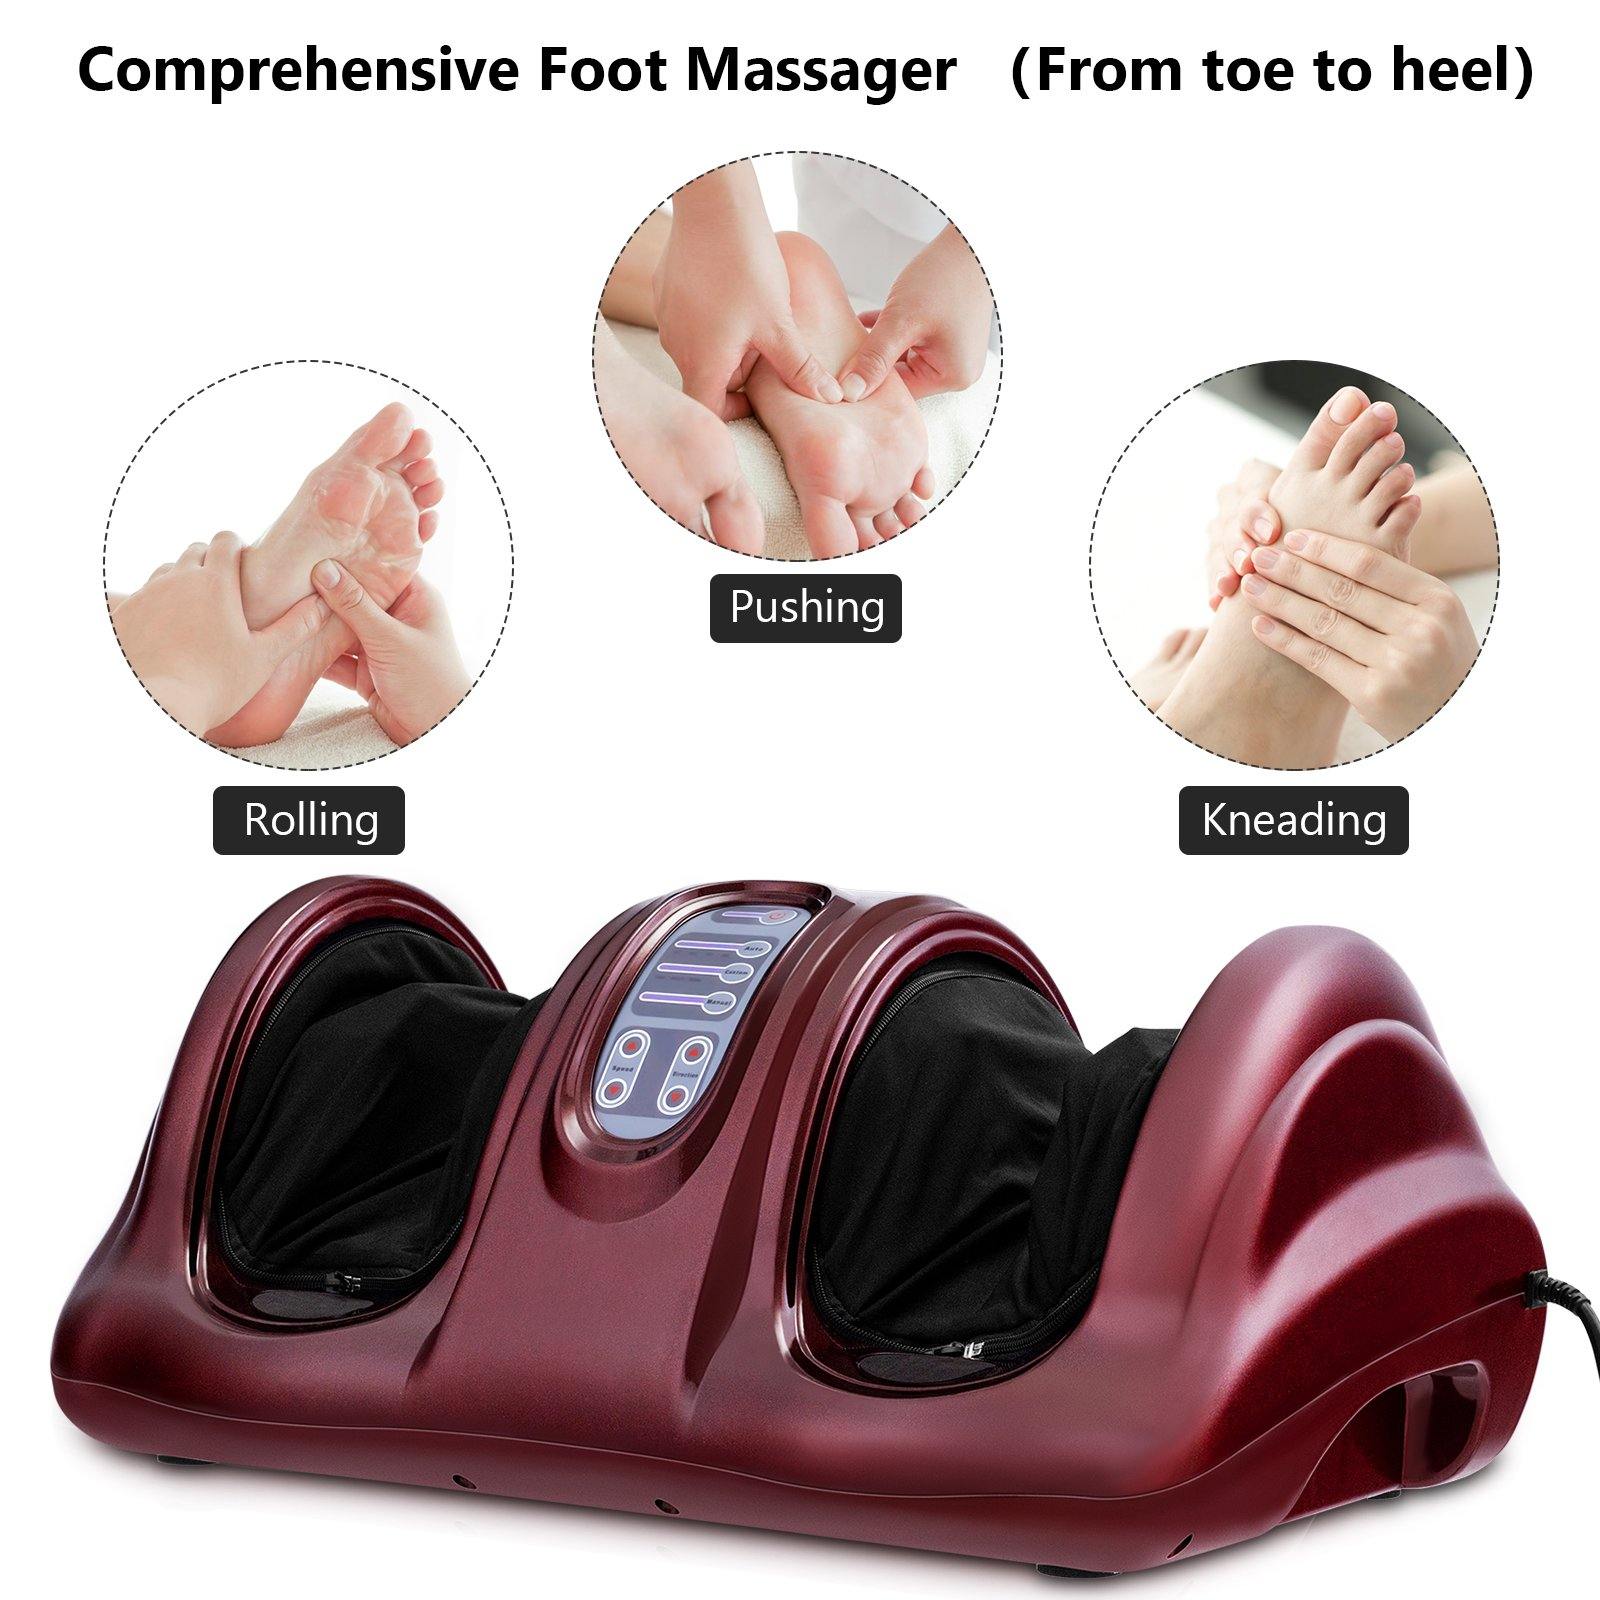 Giantex Nerve Pain Therapy Spa Gift Deep Kneading Rolling Massage for Leg Calf Ankle, Burgundy/Red/Black/Gray - Giantexus